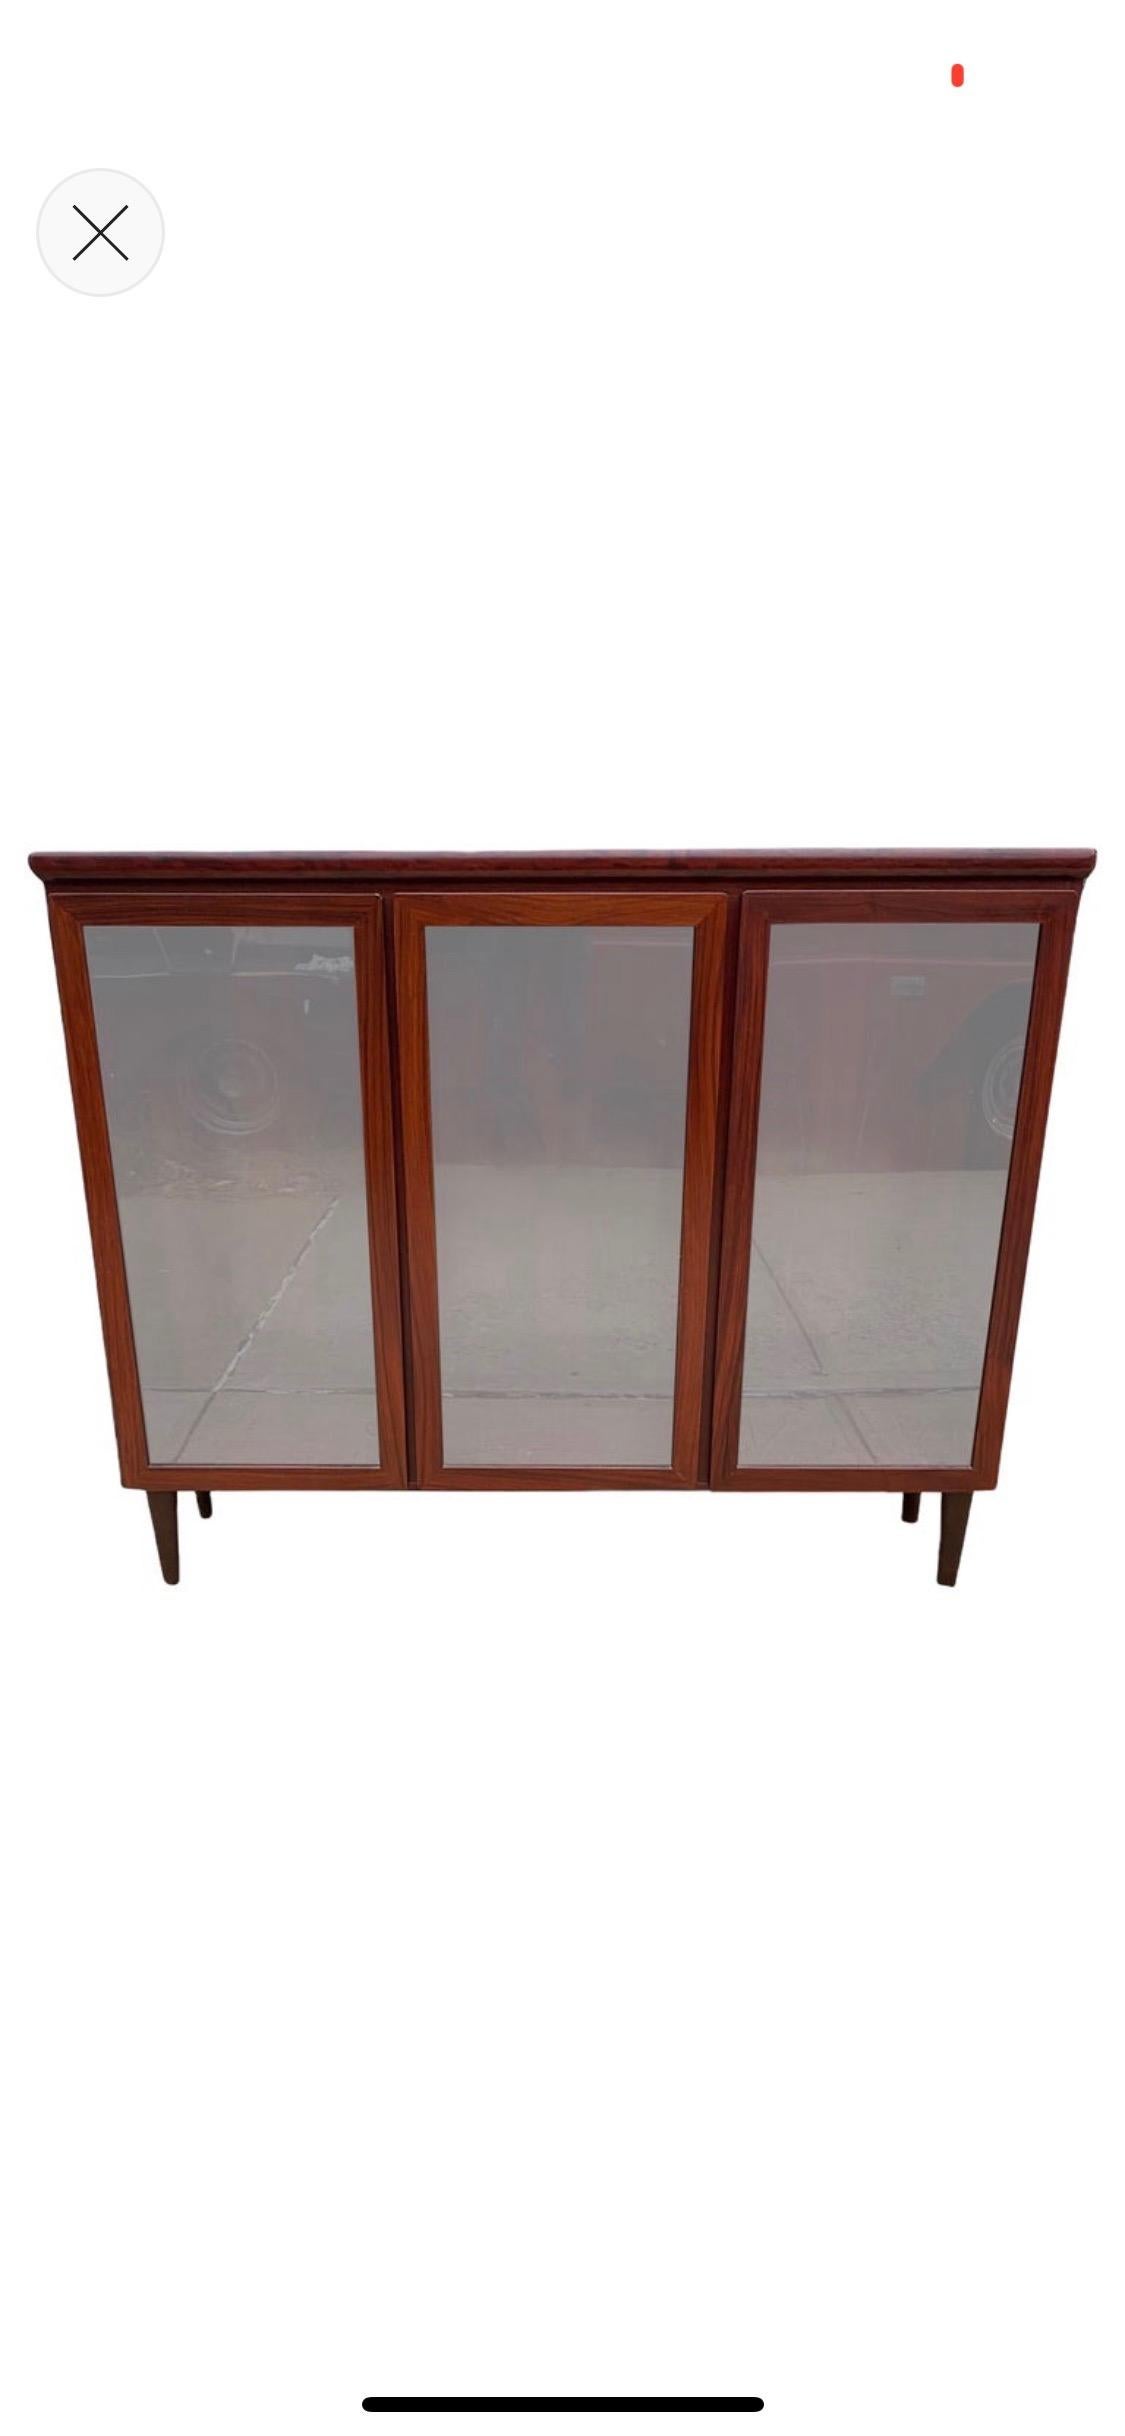 Executed in Brazilian rosewood, this cabinet bookshelf has three glass door cabinets with adjustable glass shelving to provide ample storage. Stunning rosewood grain and color. The cabinet is wired and features a light inside. Signed with original